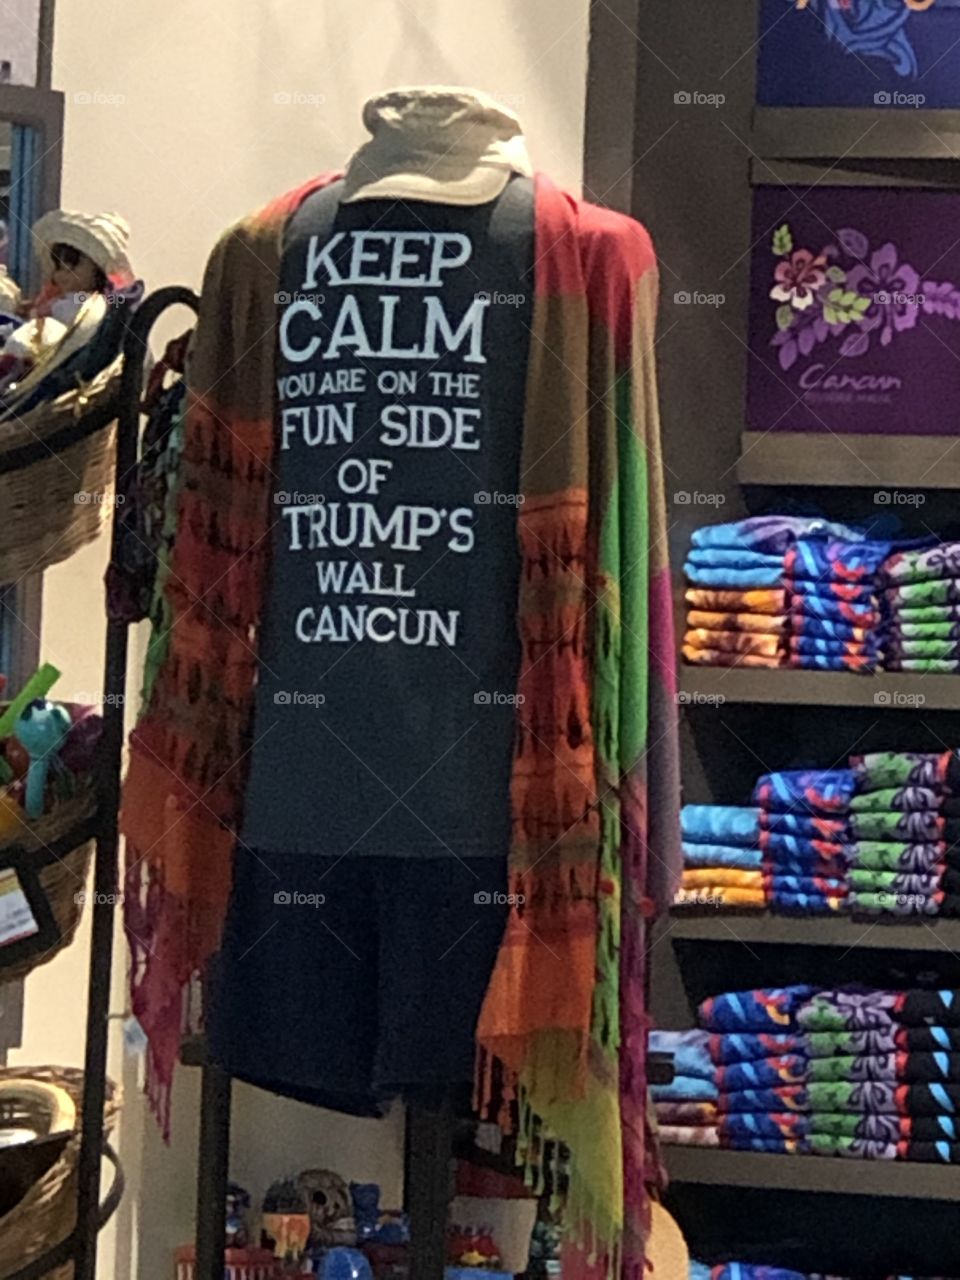 Mexican T-shirt